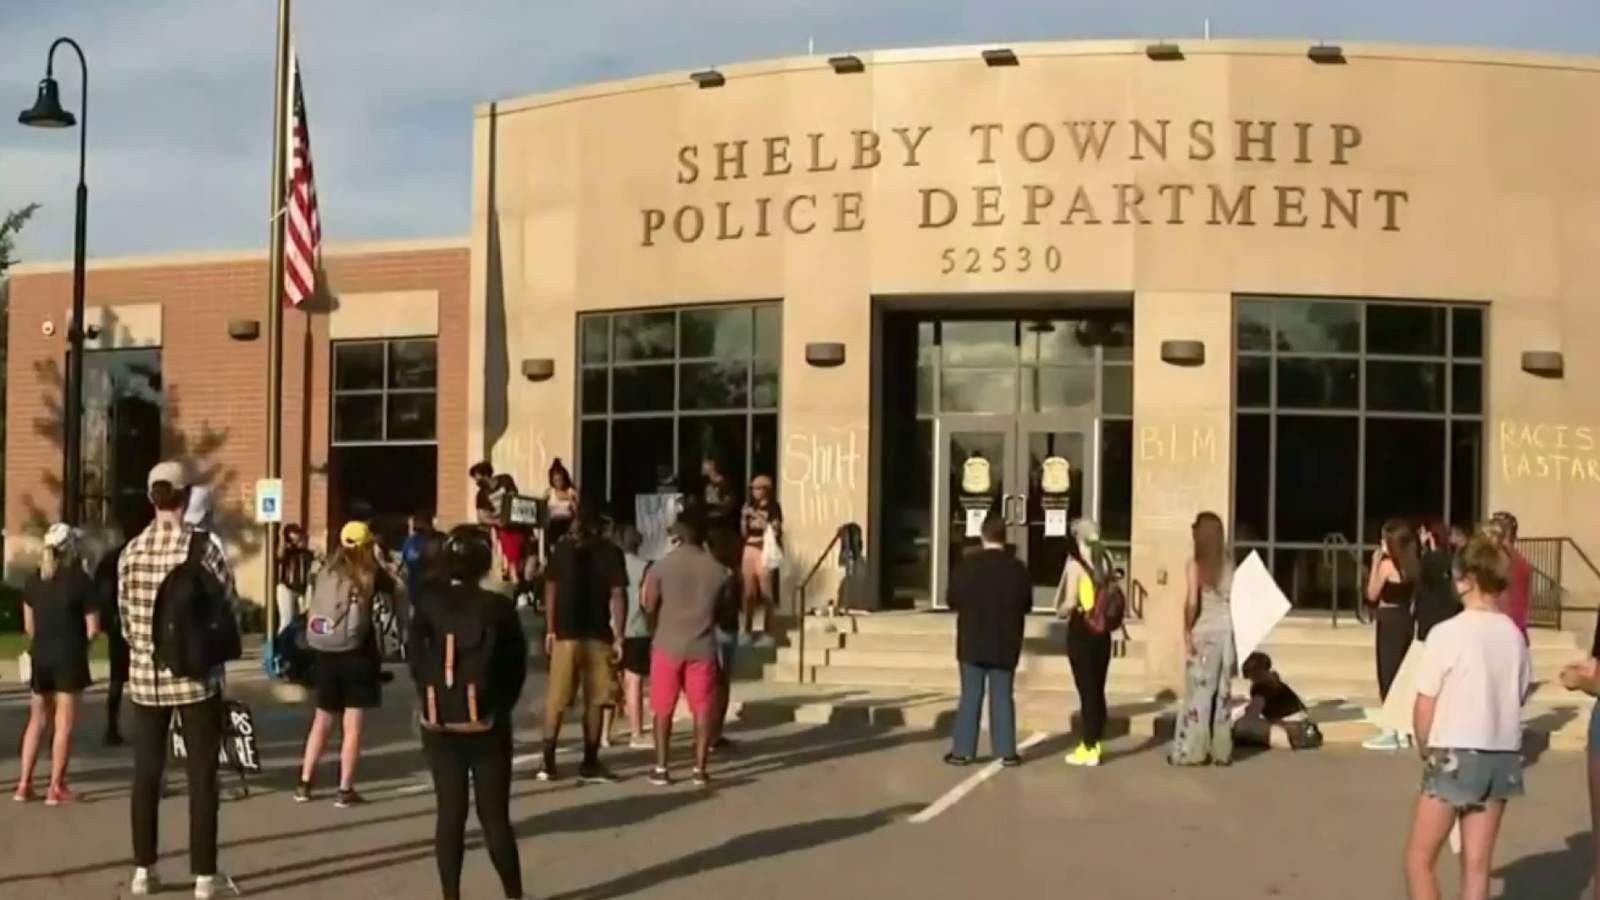 Protesters gather in Shelby Township after police chief Robert Shelide’s suspension ends